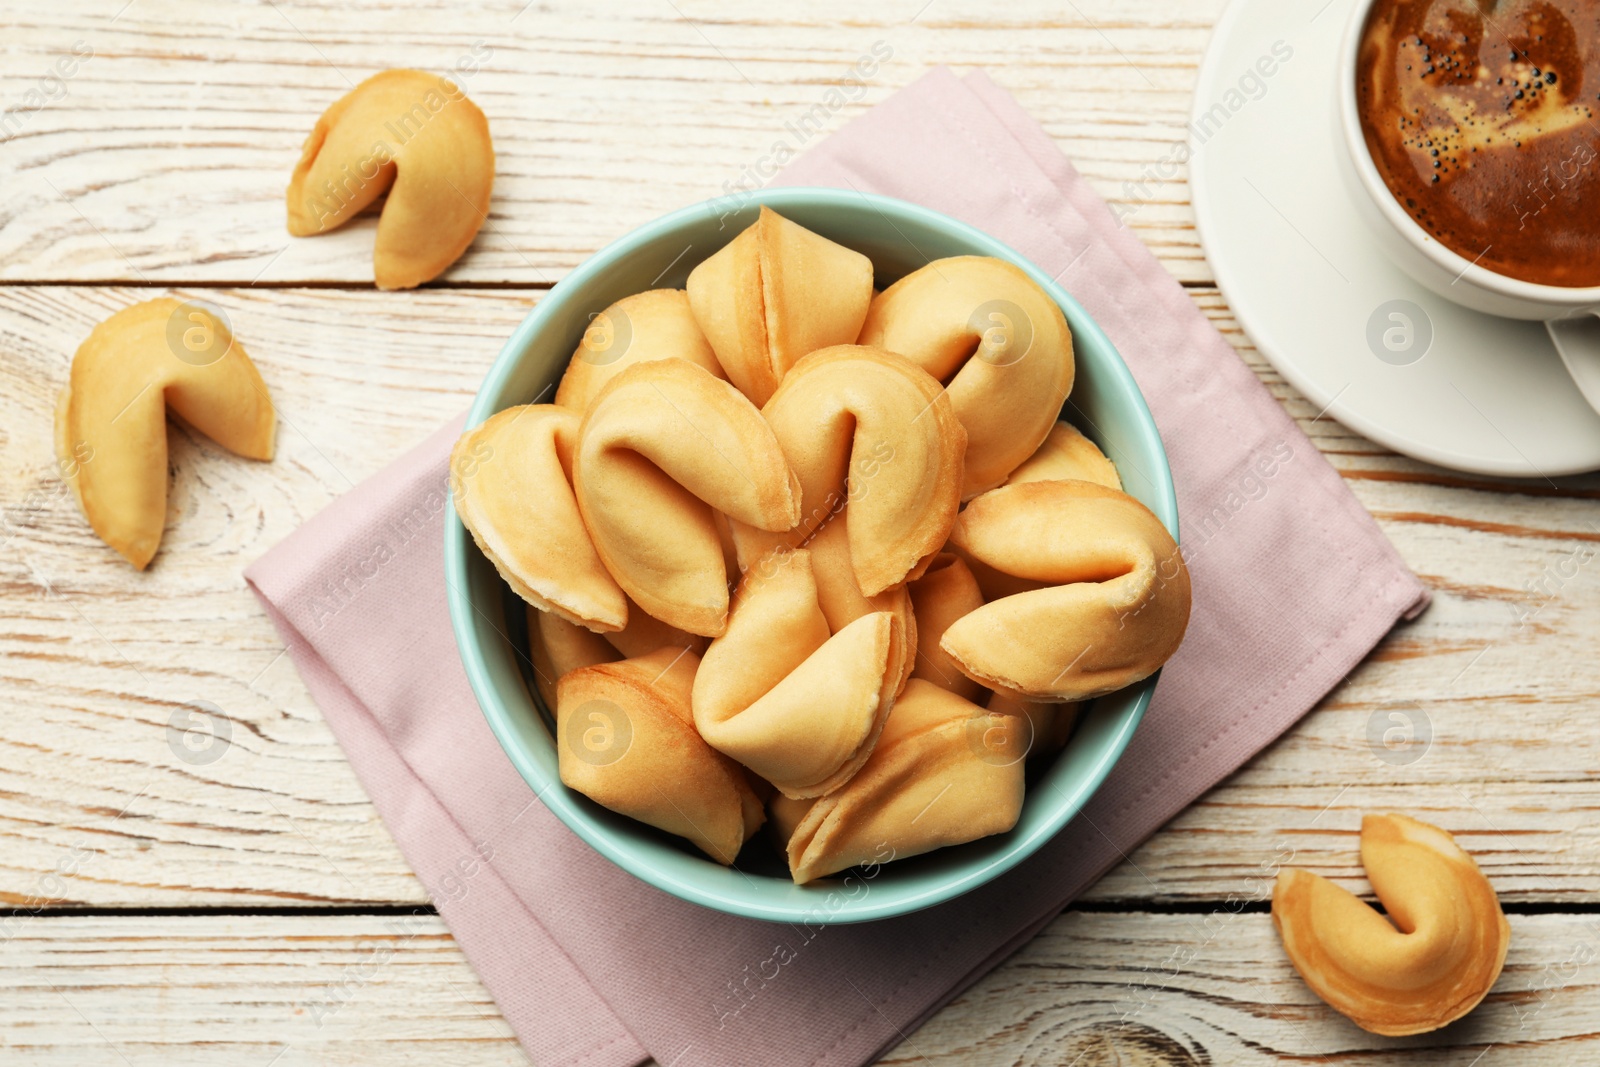 Photo of Tasty fortune cookies with predictions on white wooden table, flat lay